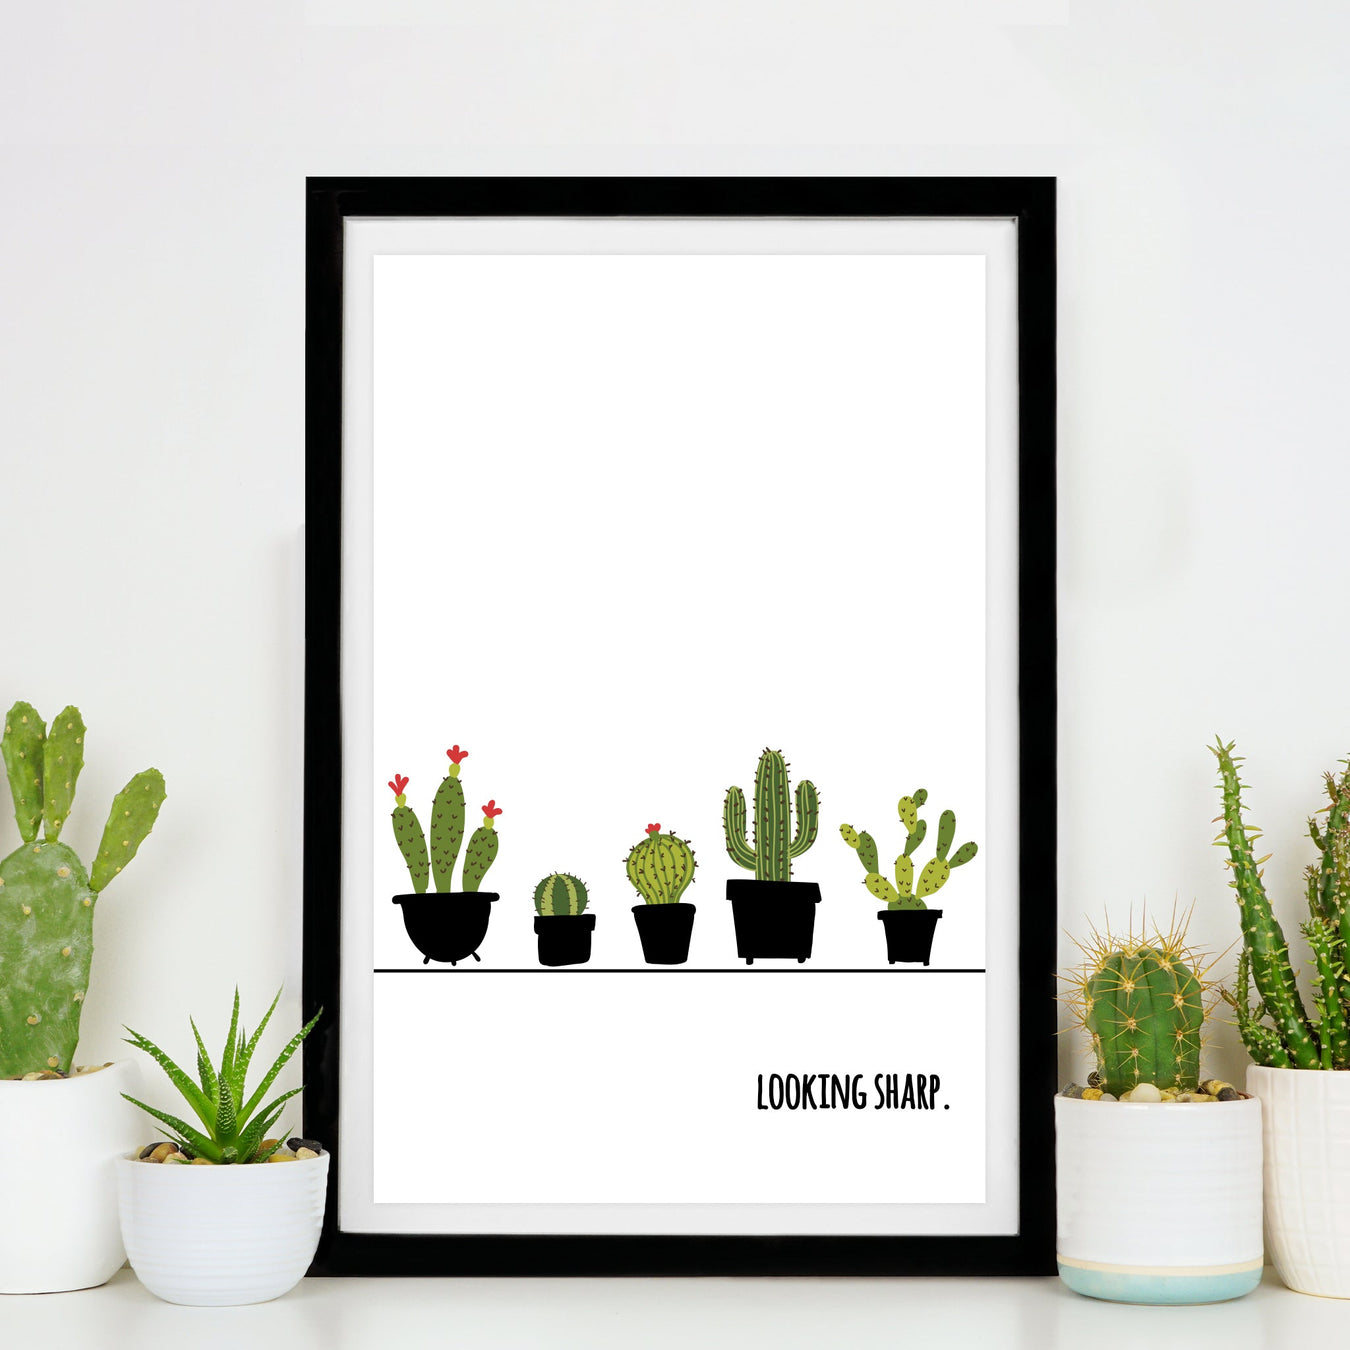 A framed art print that shows different illustrated cacti and the words "Looking Sharp" sits on a white table with small potted succulents and cacti around it.